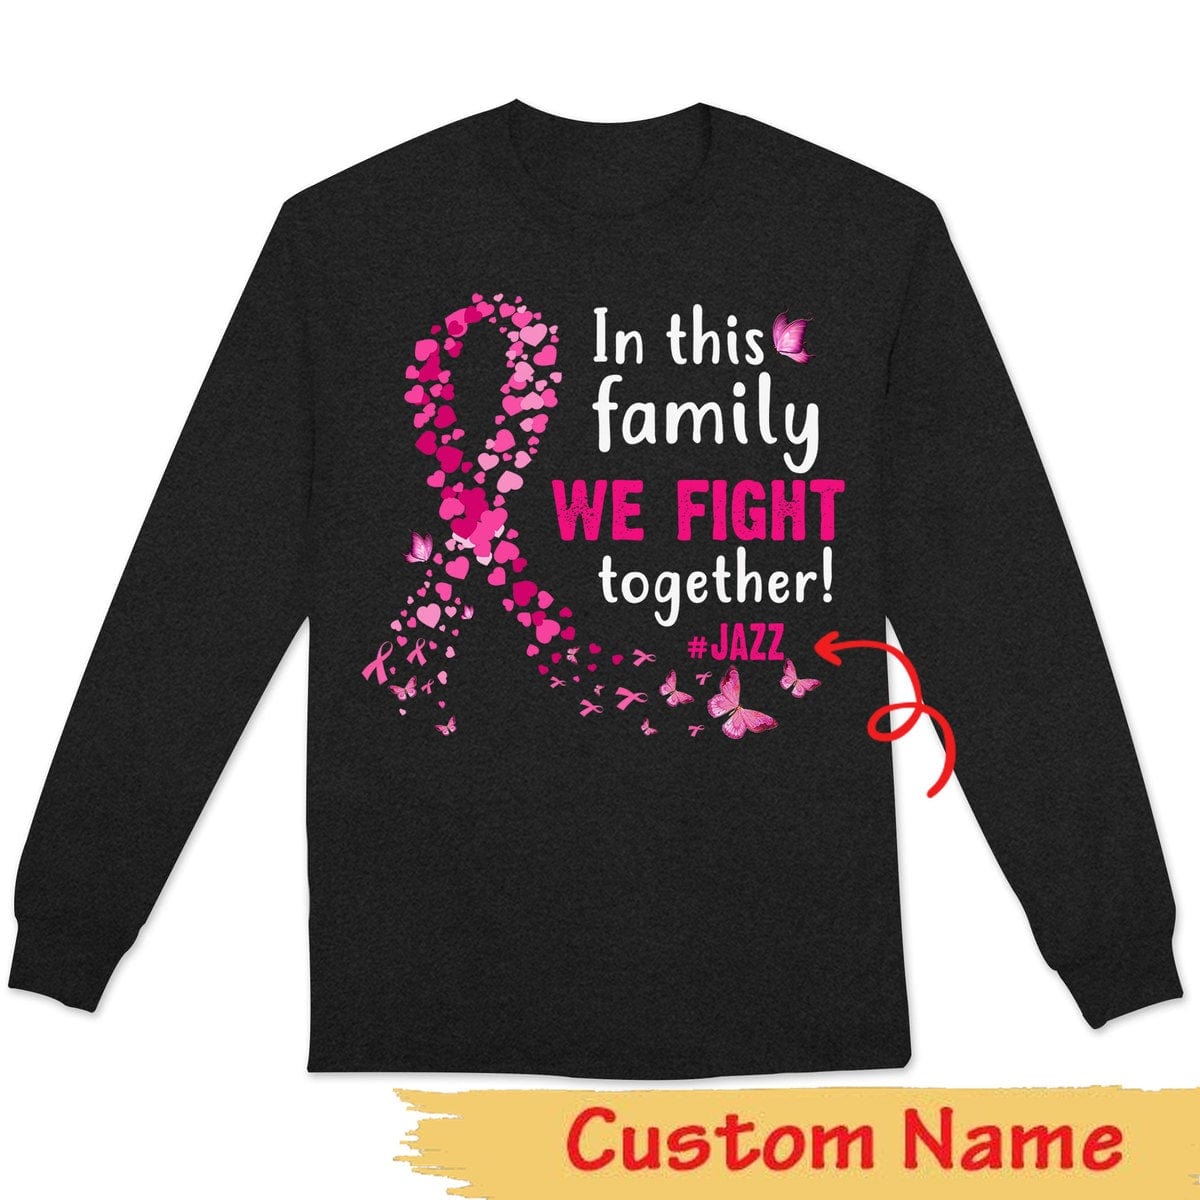 In Family We Fight Together, Butterfly Ribbon Personalized Breast Cancer Long Sleeve Shirts